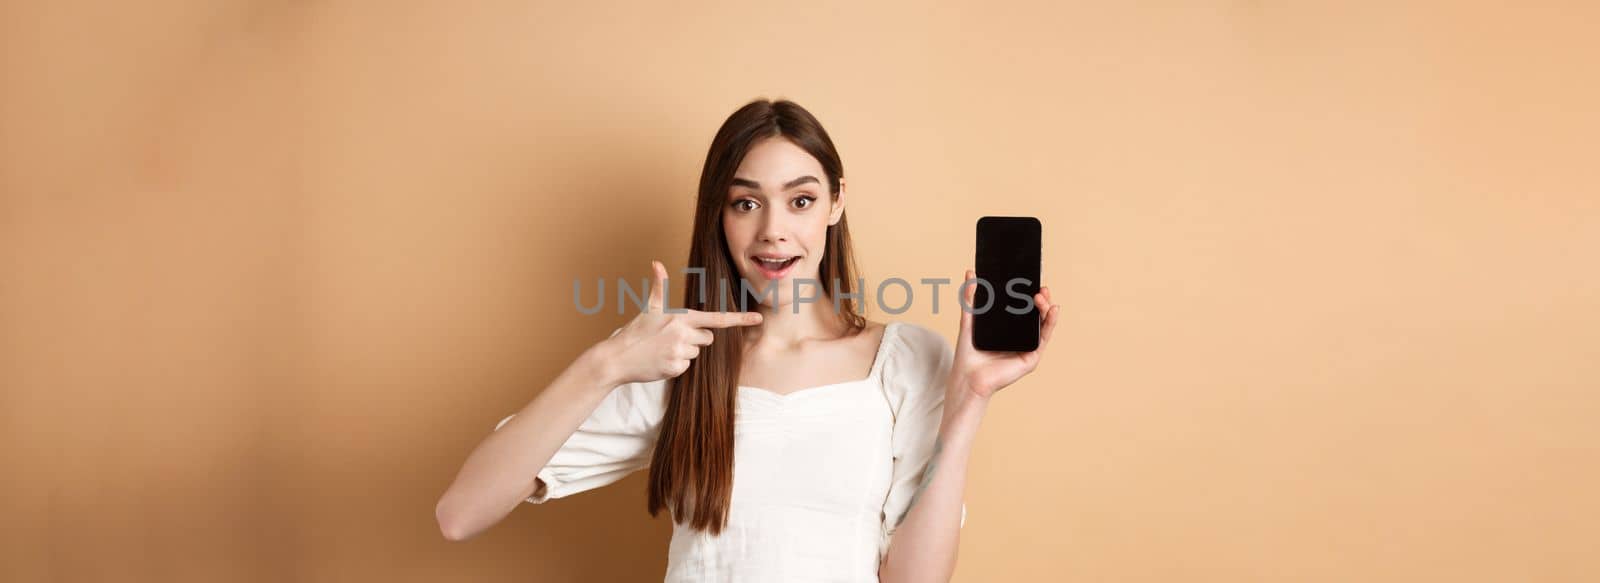 Cheerful woman pointing finger at empty phone screen, looking excited, standing on beige background.